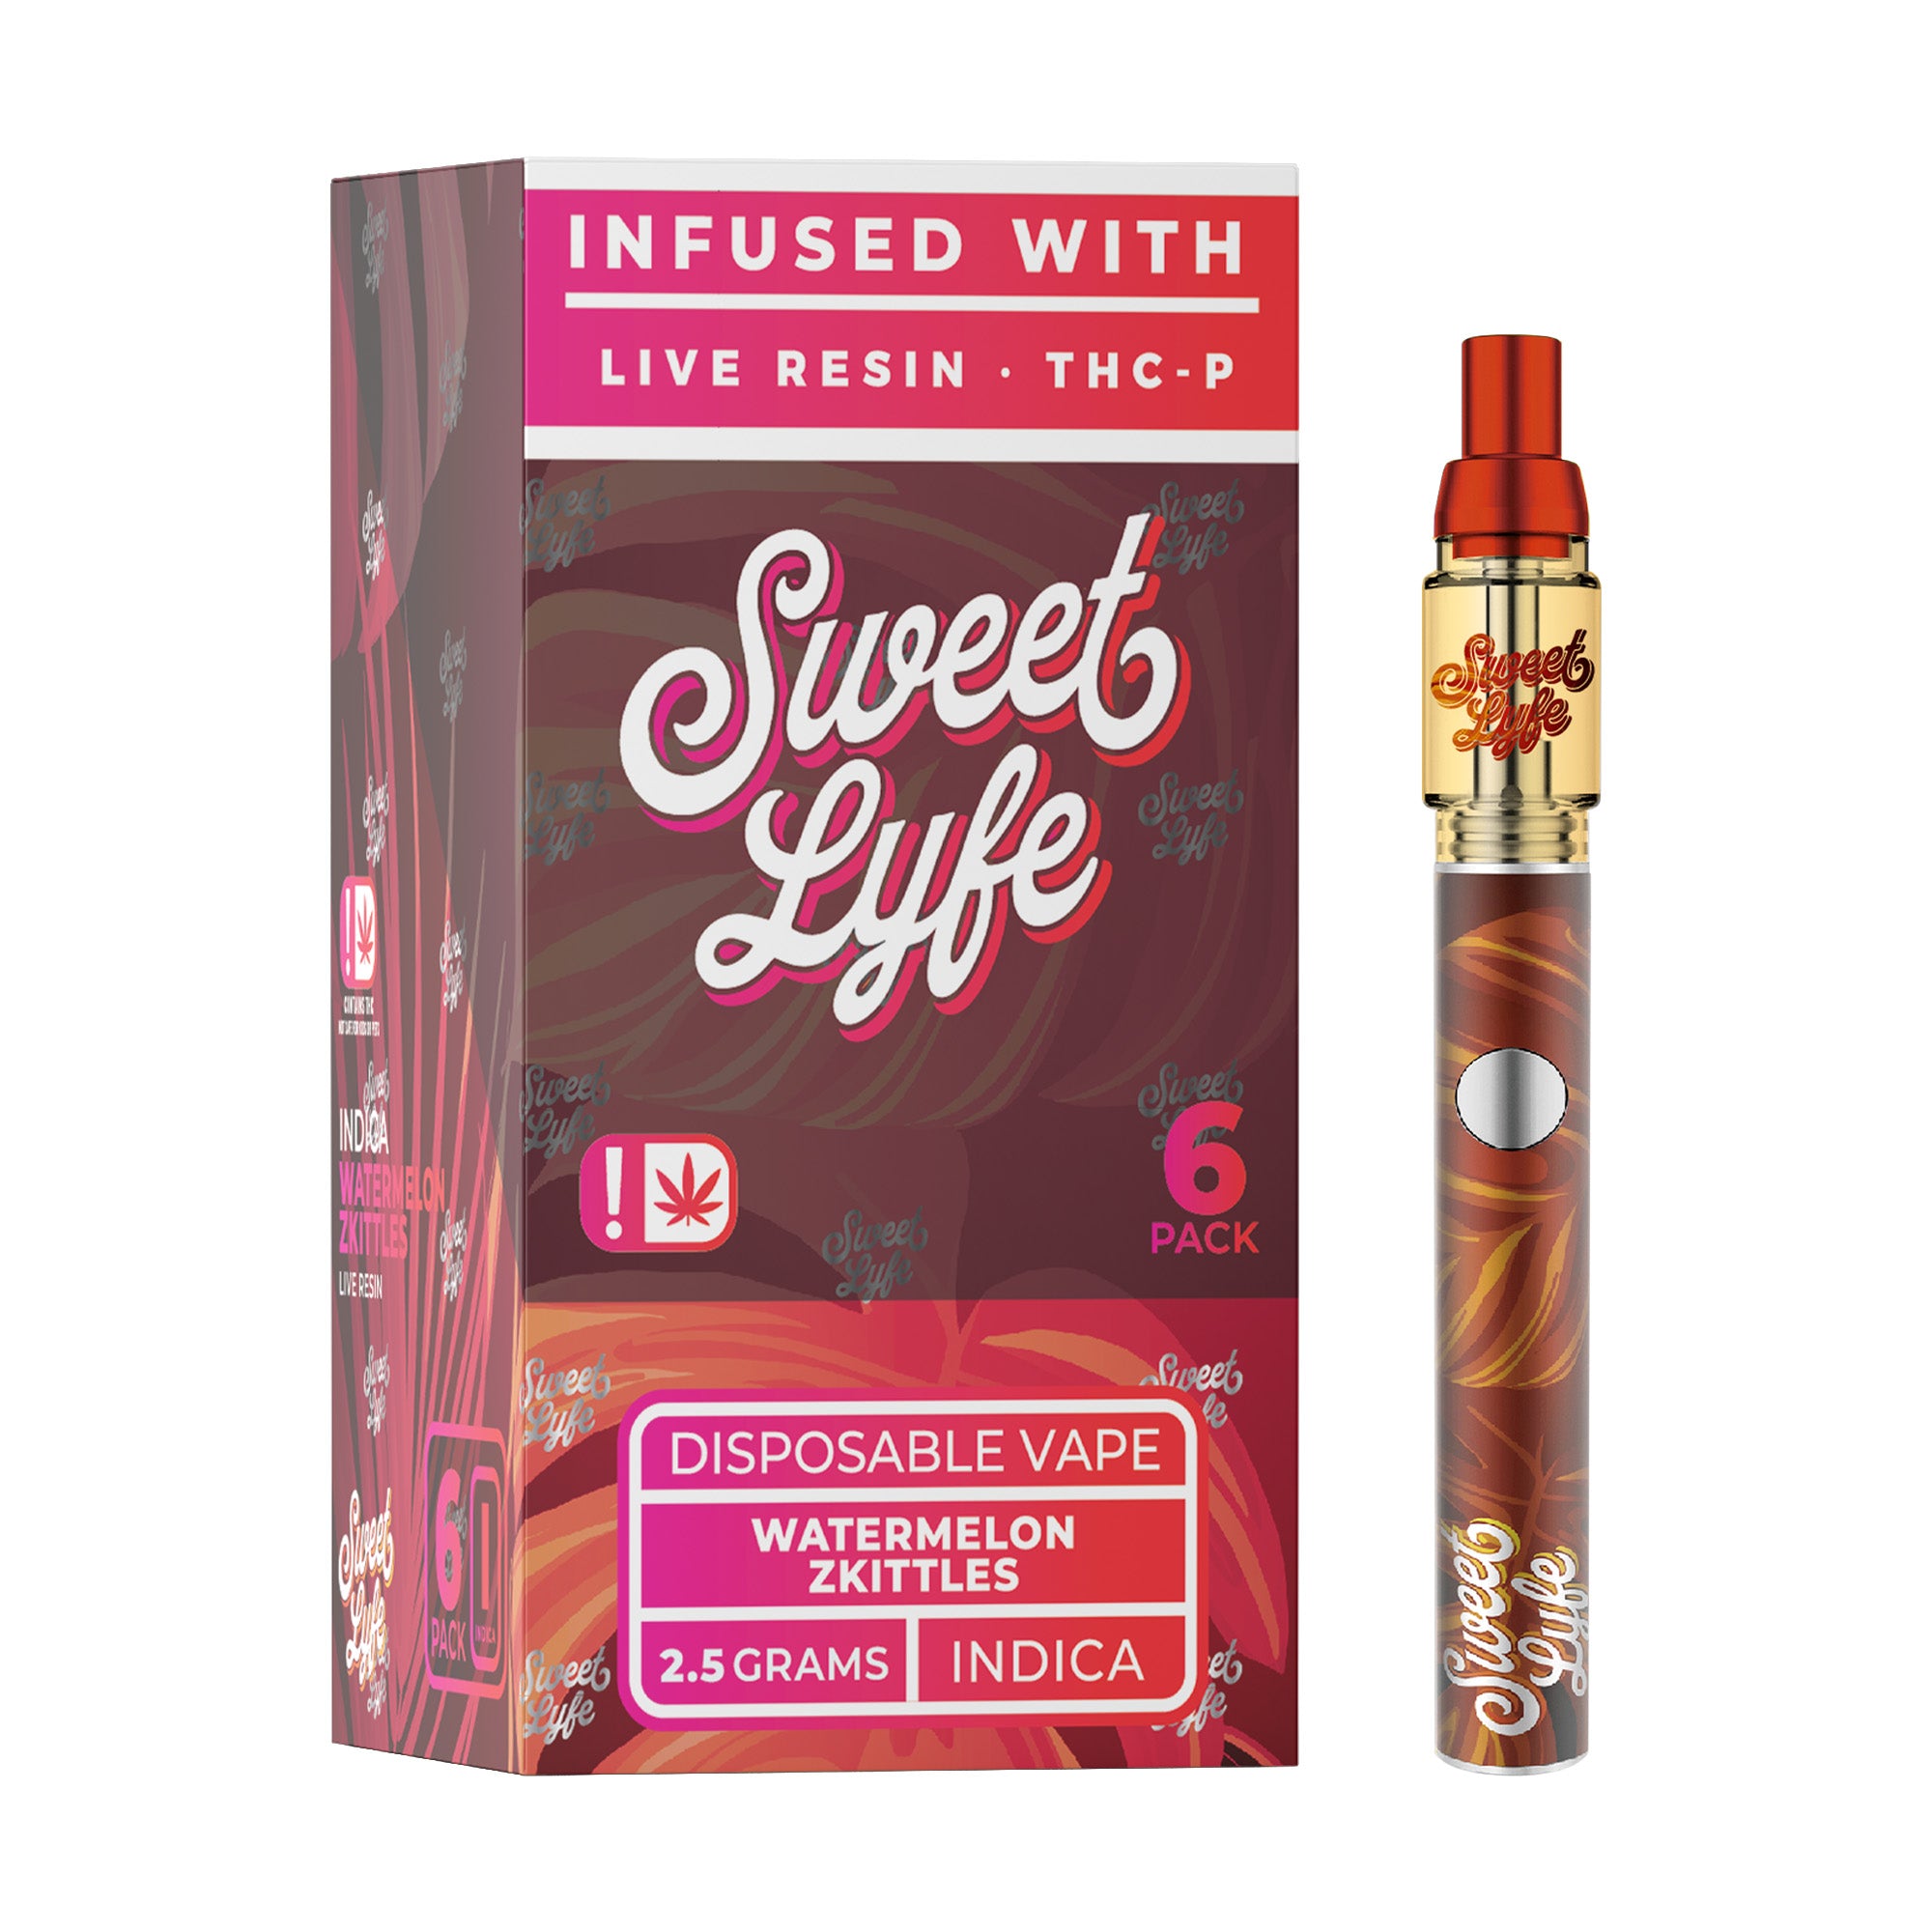 Disposable Vape Pen 2.5ml Infused with Live Resin Delta-8 + THCP - Watermelon Zkittles - Indica